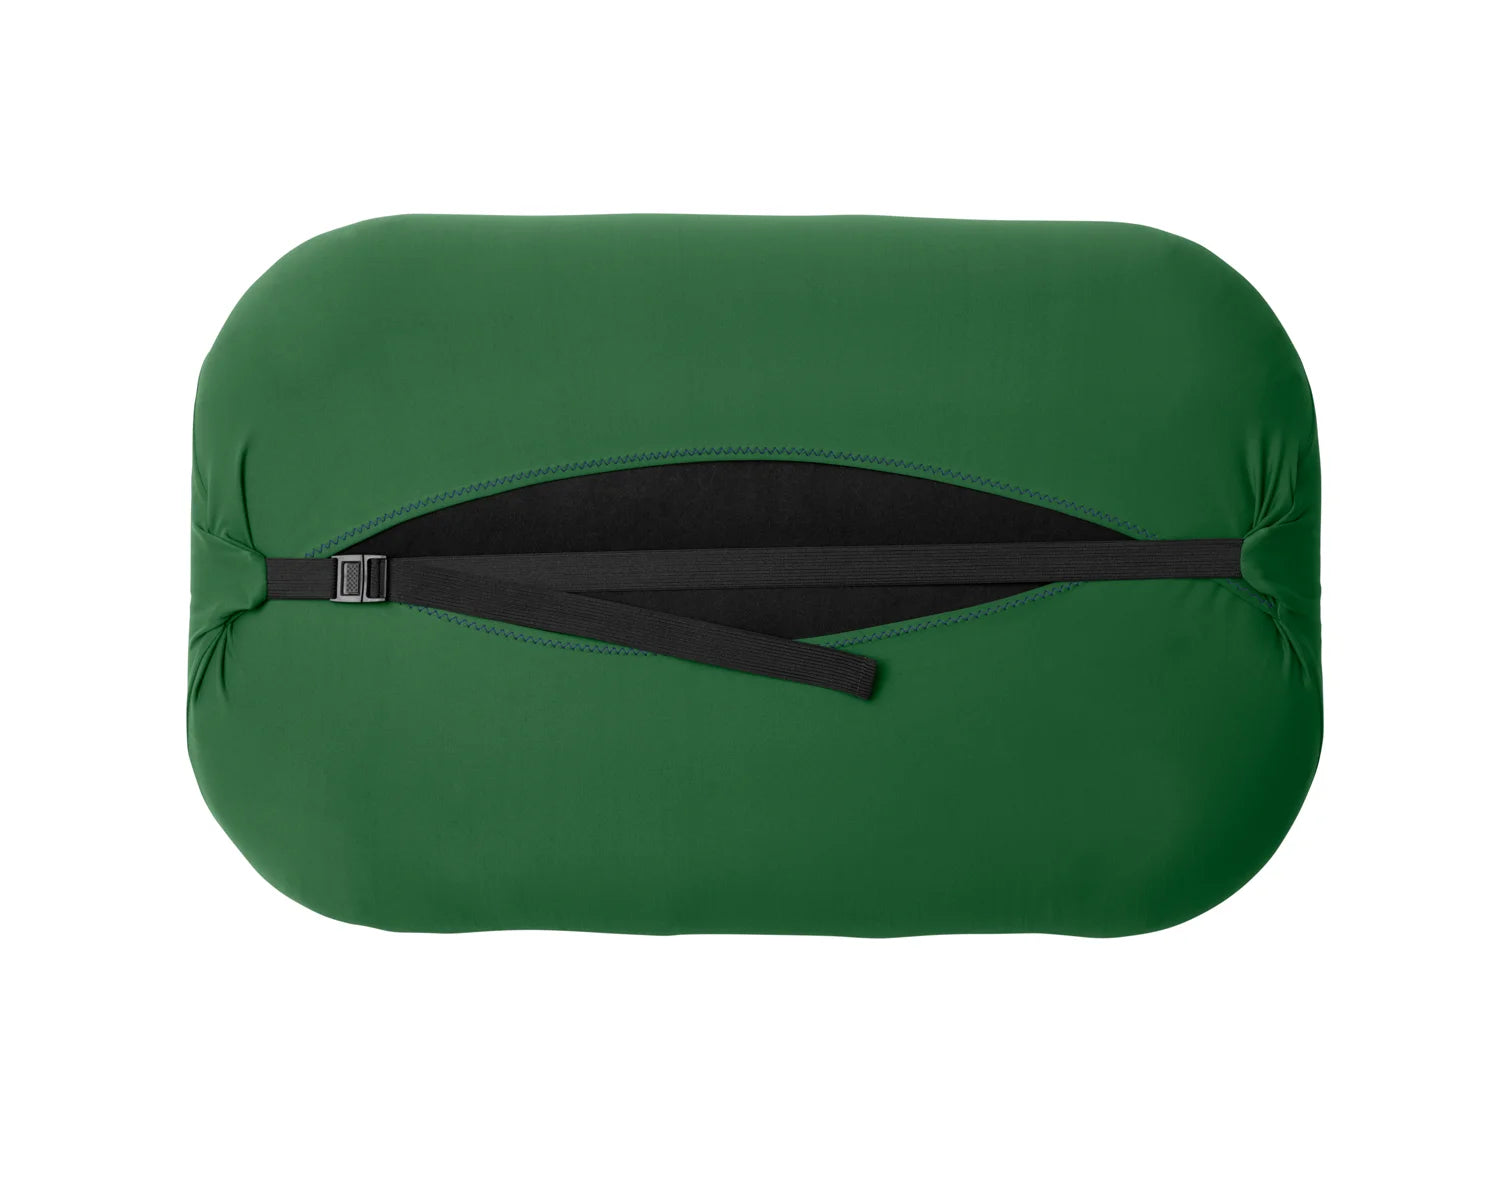 Trifold enclosure and strap of large in green Pillow Strap to securely hold camp pillow to sleeping pad.